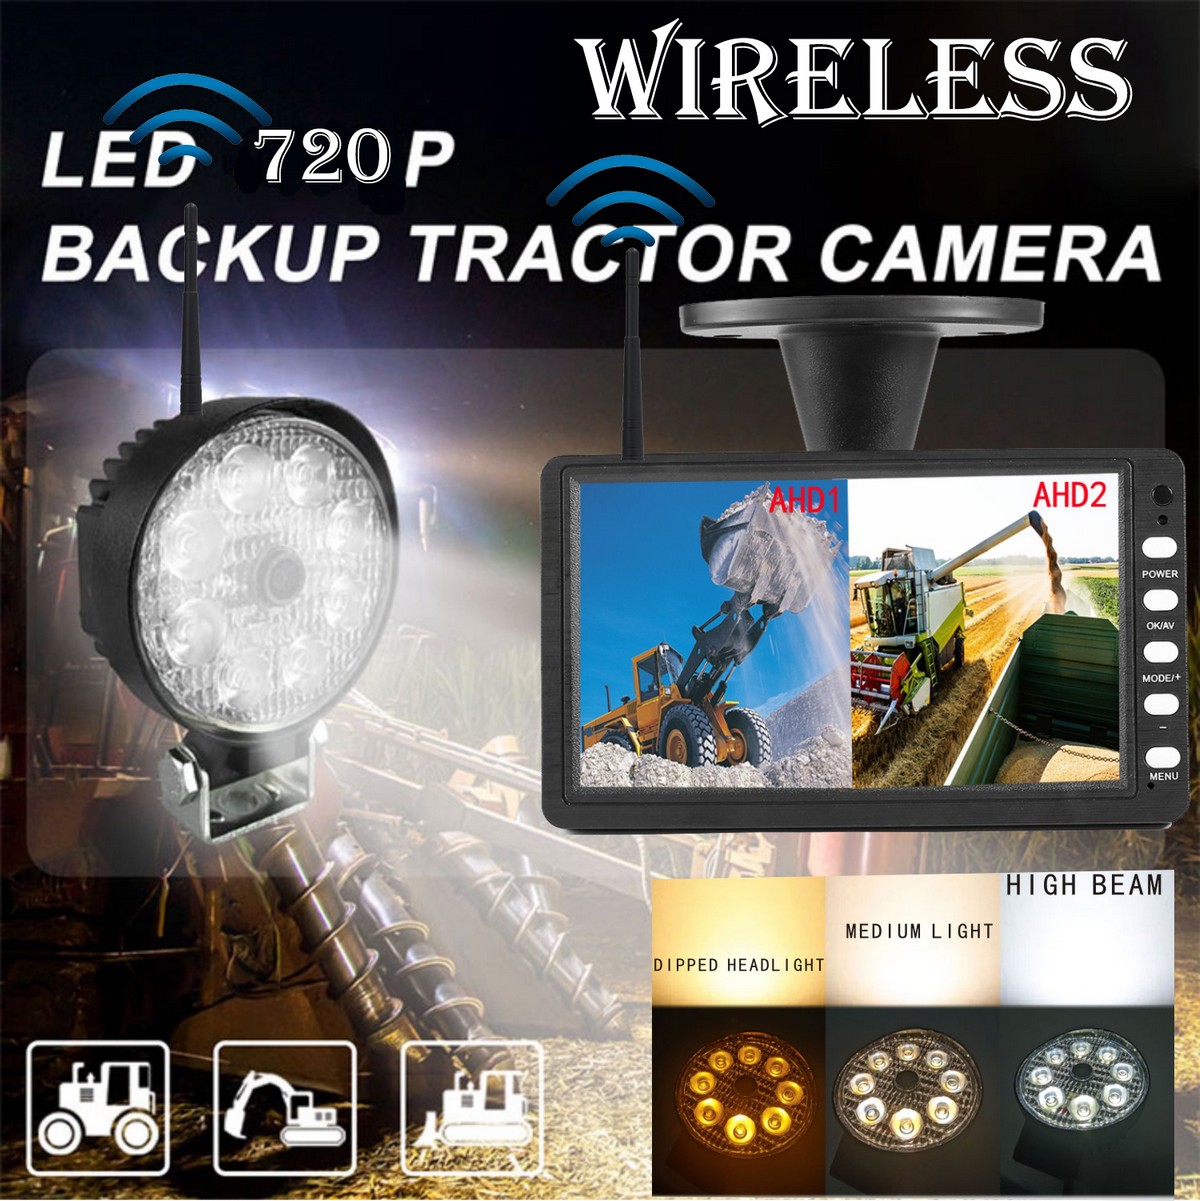 Backup set - Wifi camera with powerful white LED light and many functions